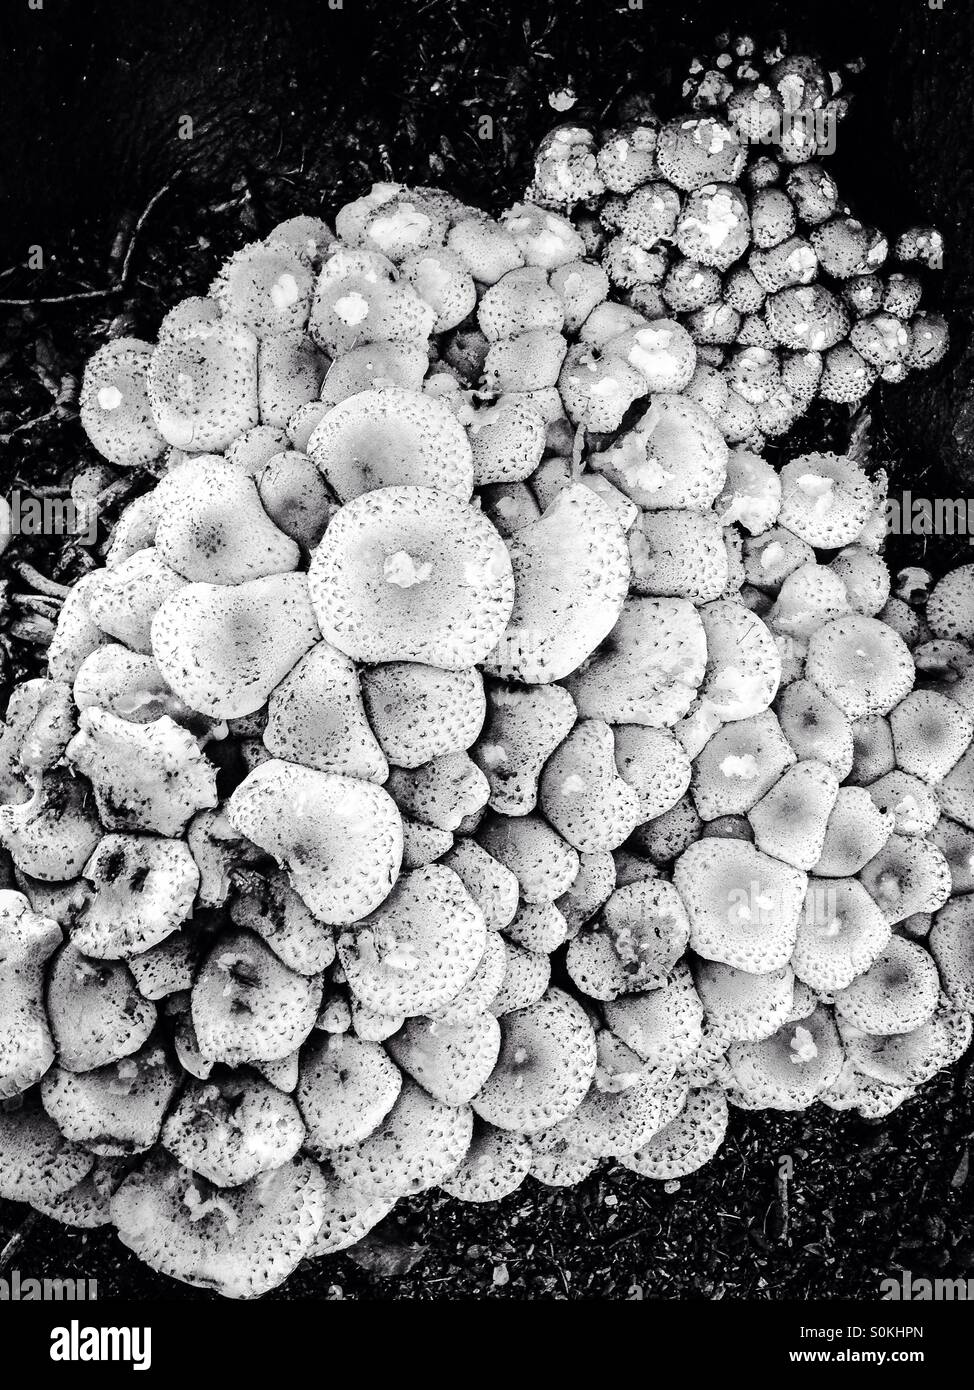 Black and white image of a crop of woodland fungi. Stock Photo